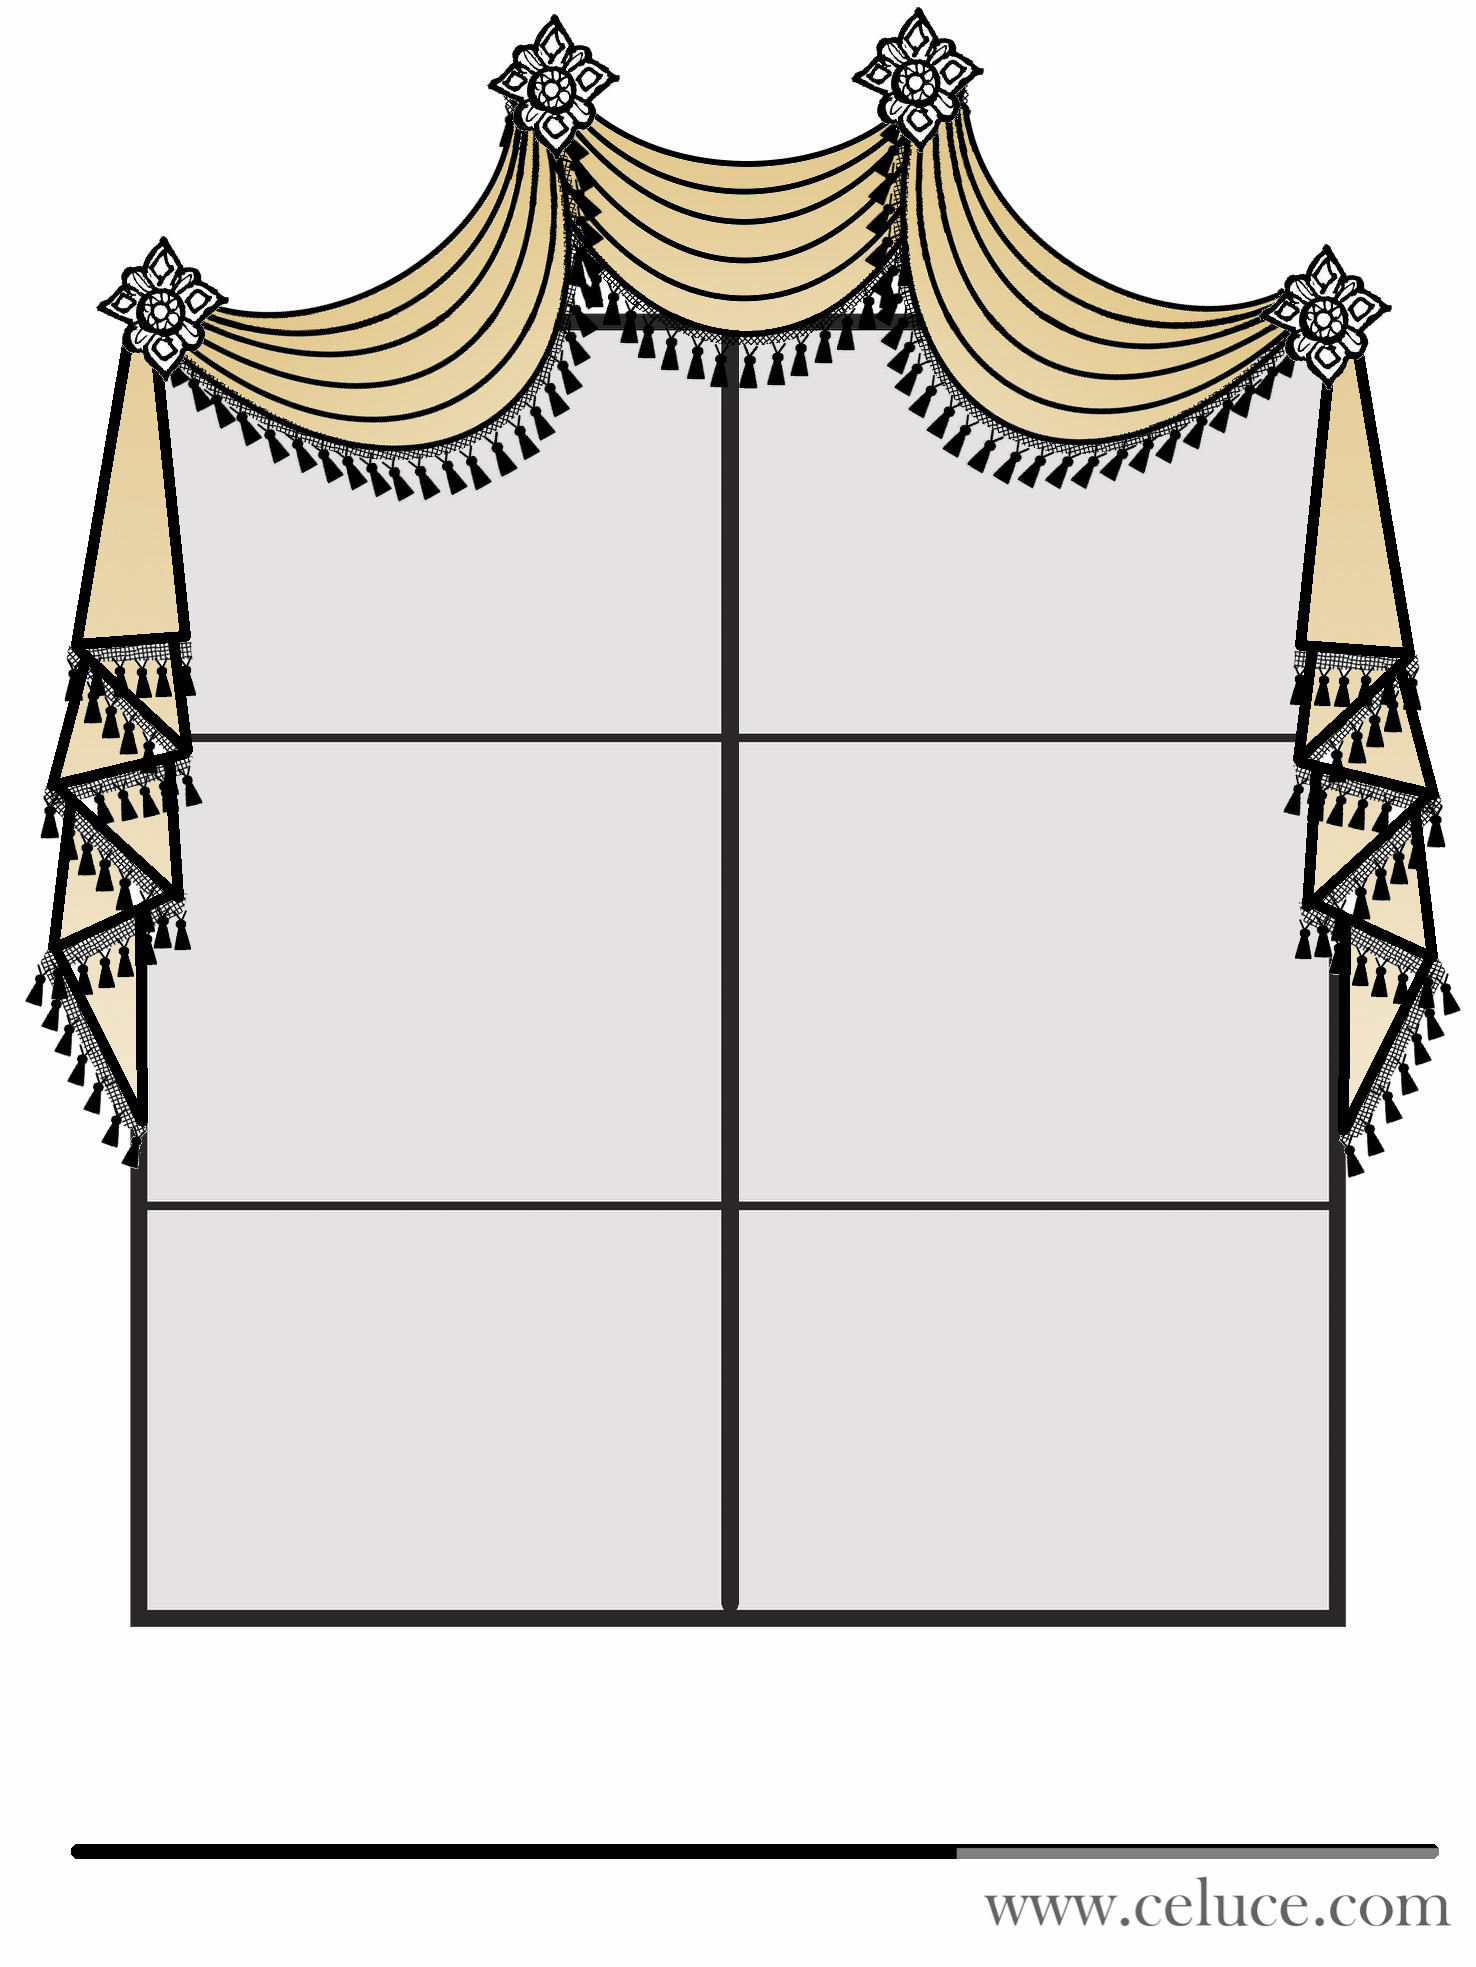 Arch Shaped Swag Valance over Regular Window